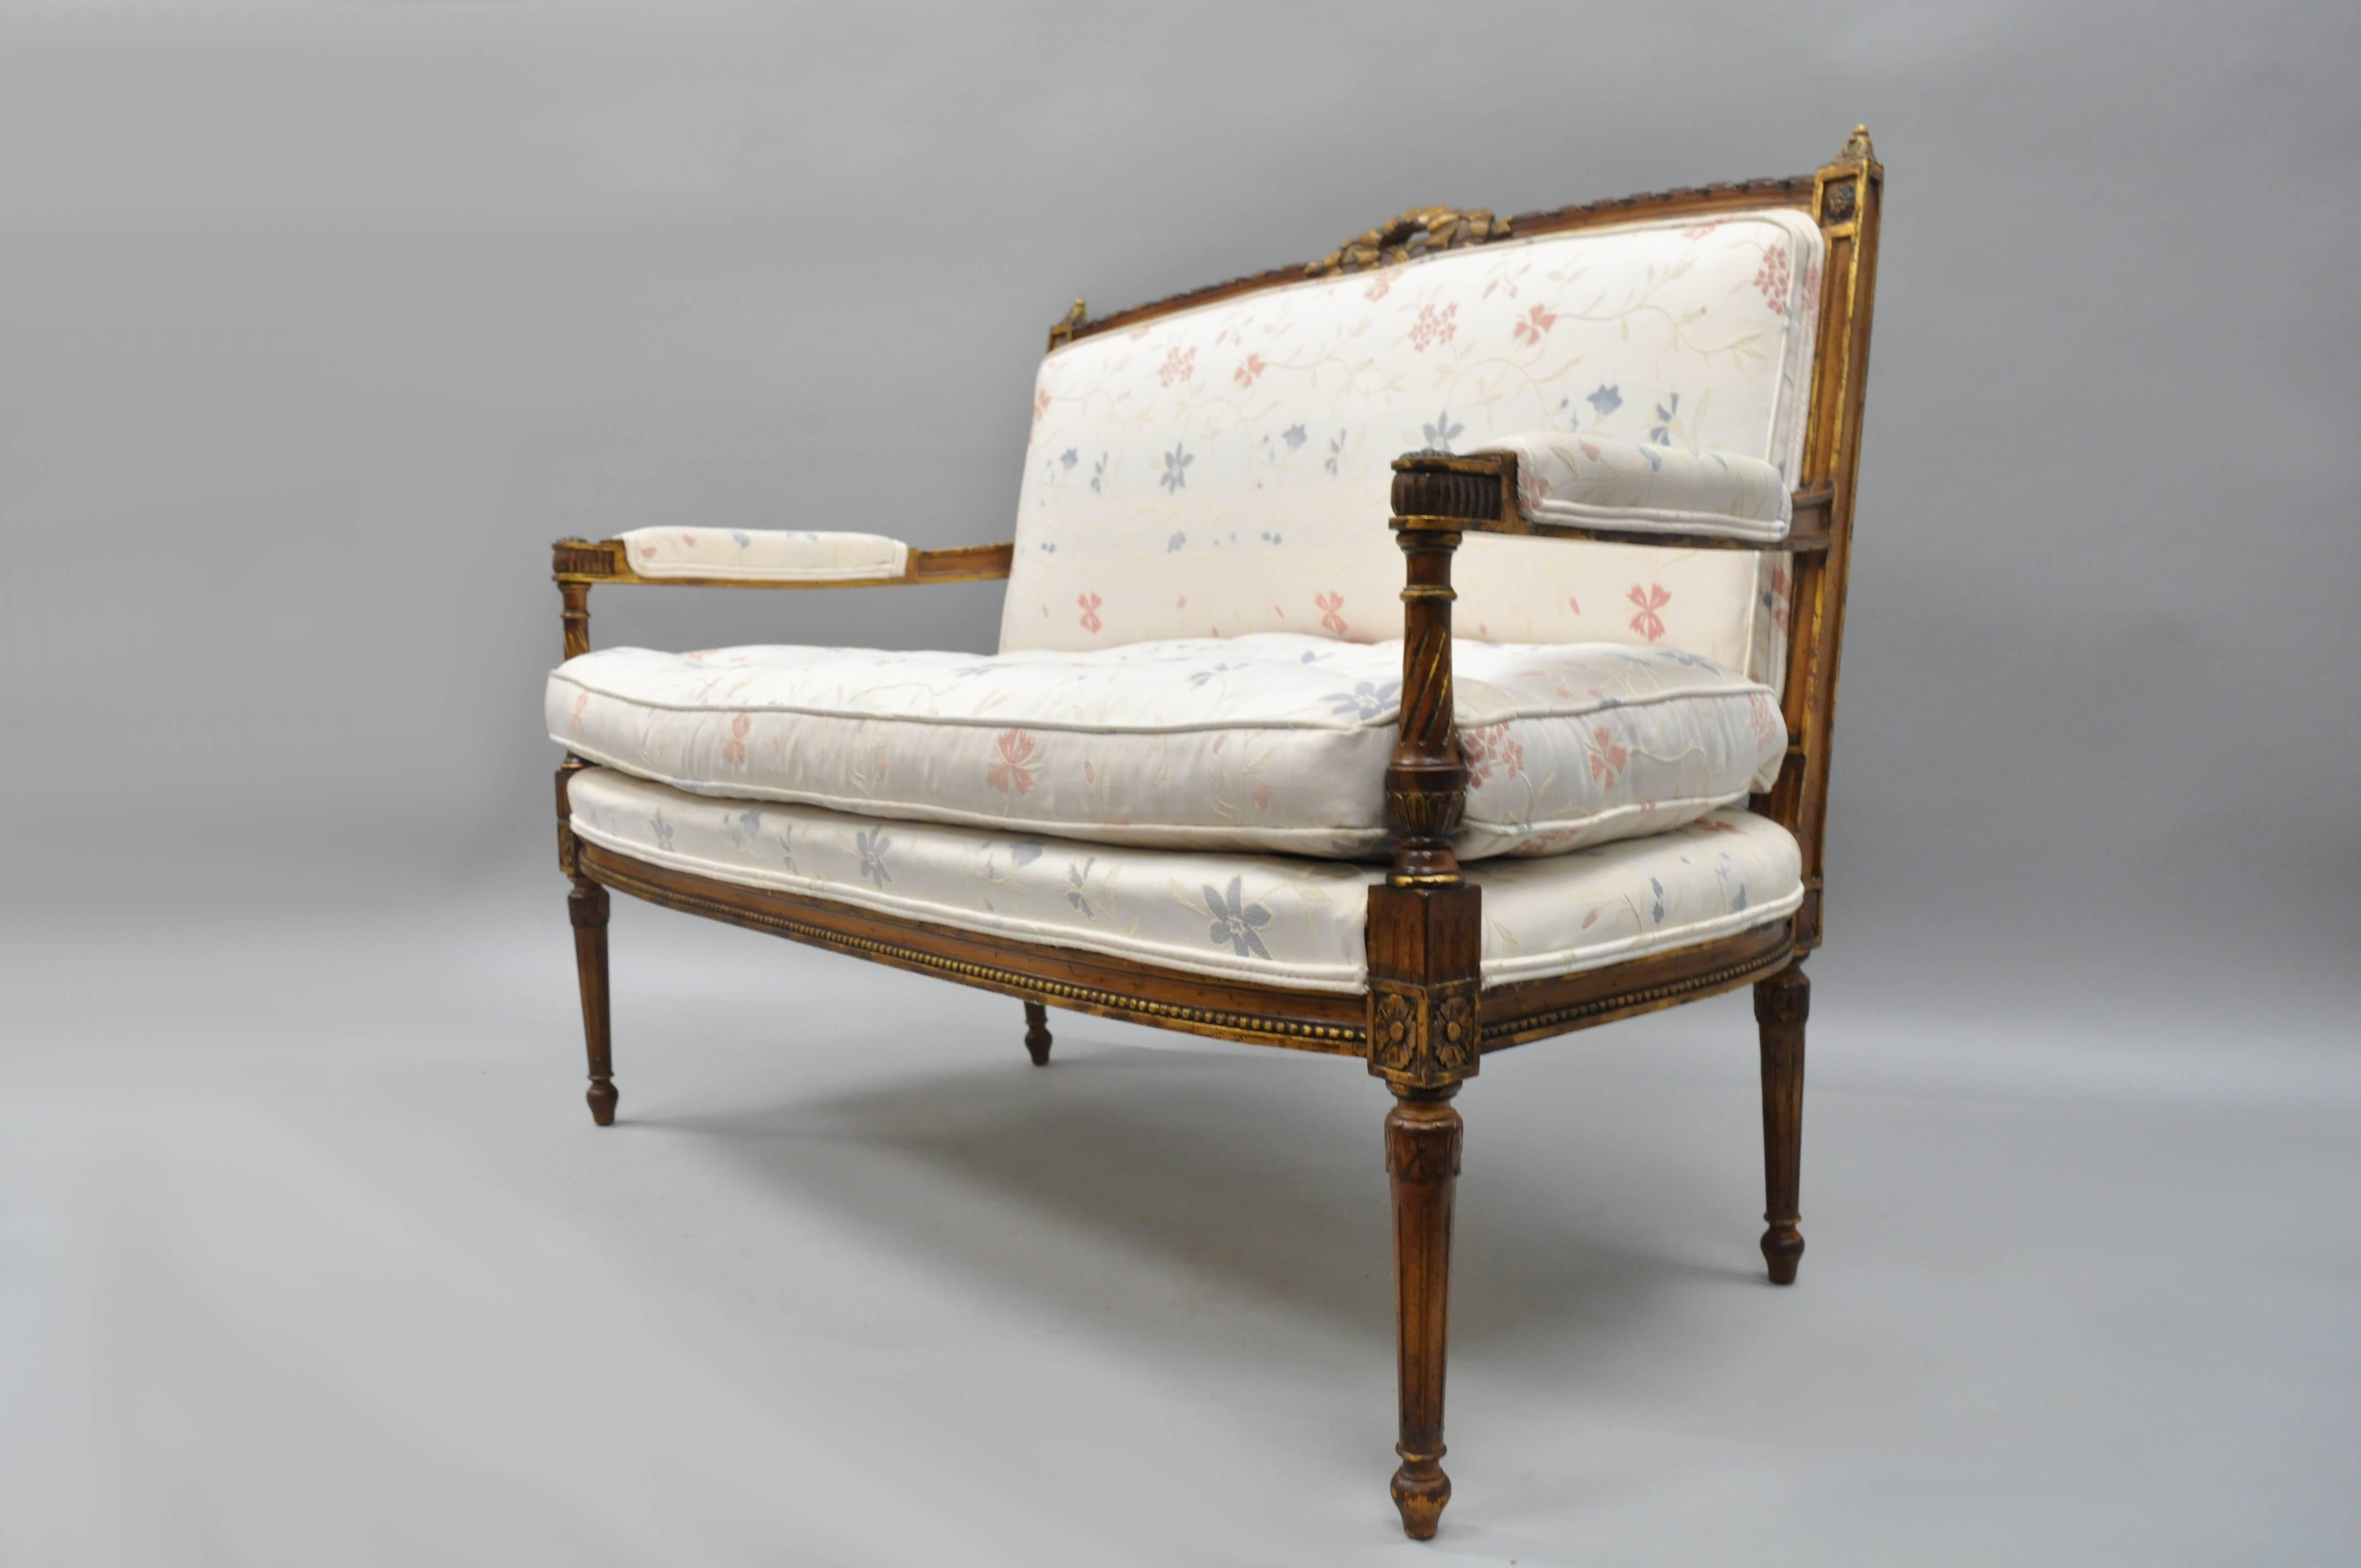 Vintage French Louis XVI style gold settee, circa mid-20th century. Settee features a ribbon carved crest, rectangular back, solid wood frame, upholstered armrests, floral print fabric with tufted seat, reed and tapered legs, loose cushion, and